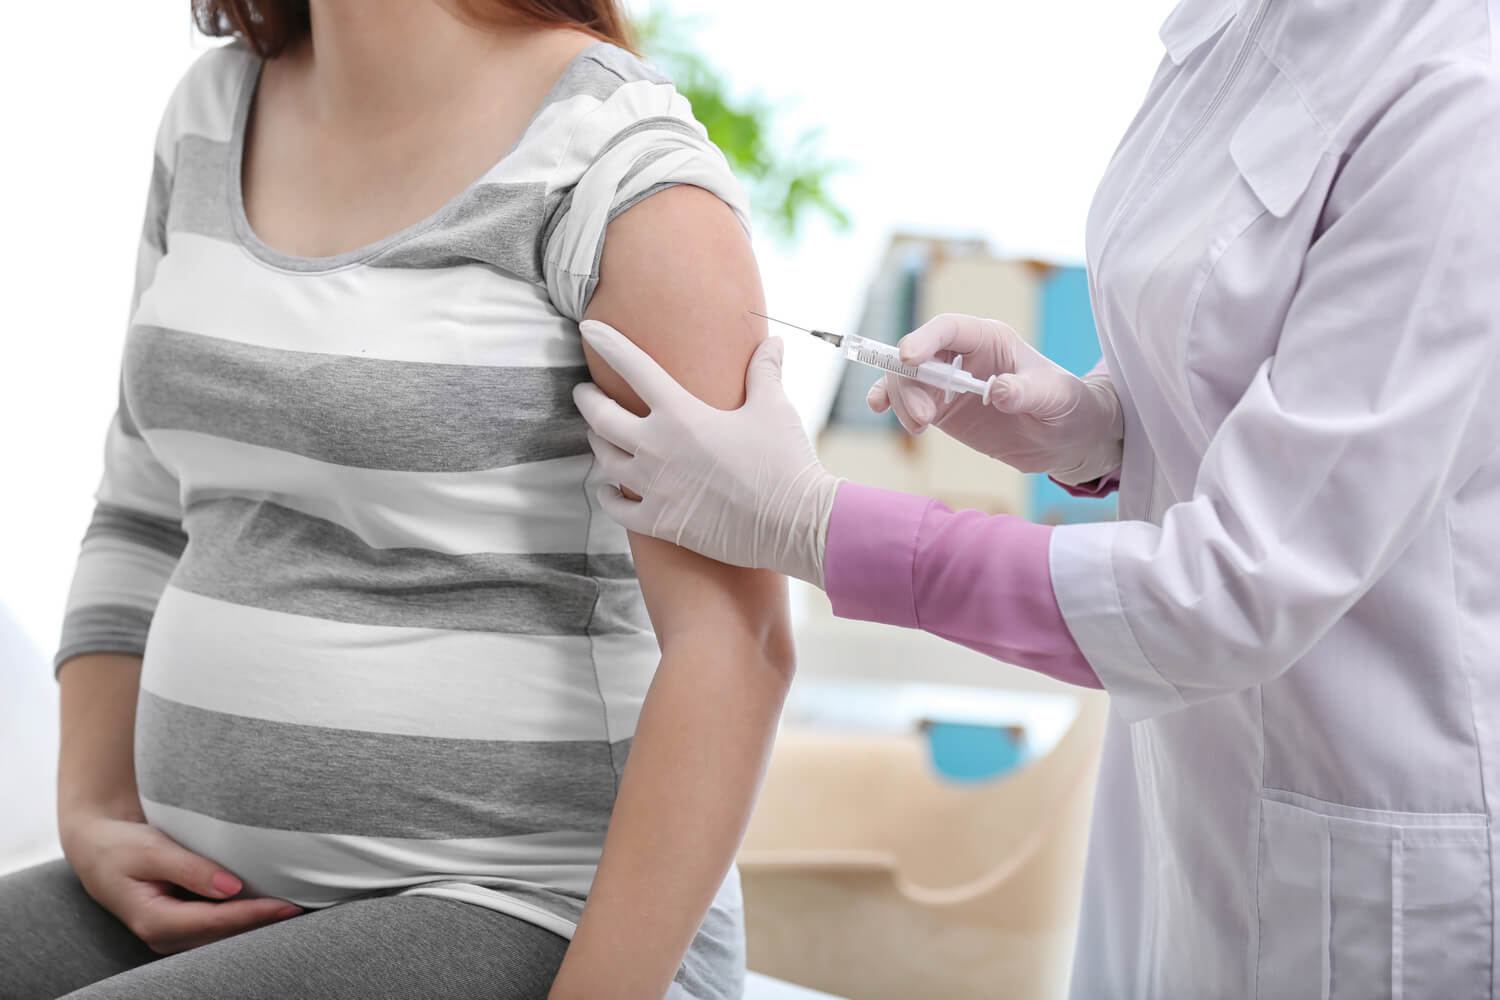 Flu Vaccination During Pregnancy